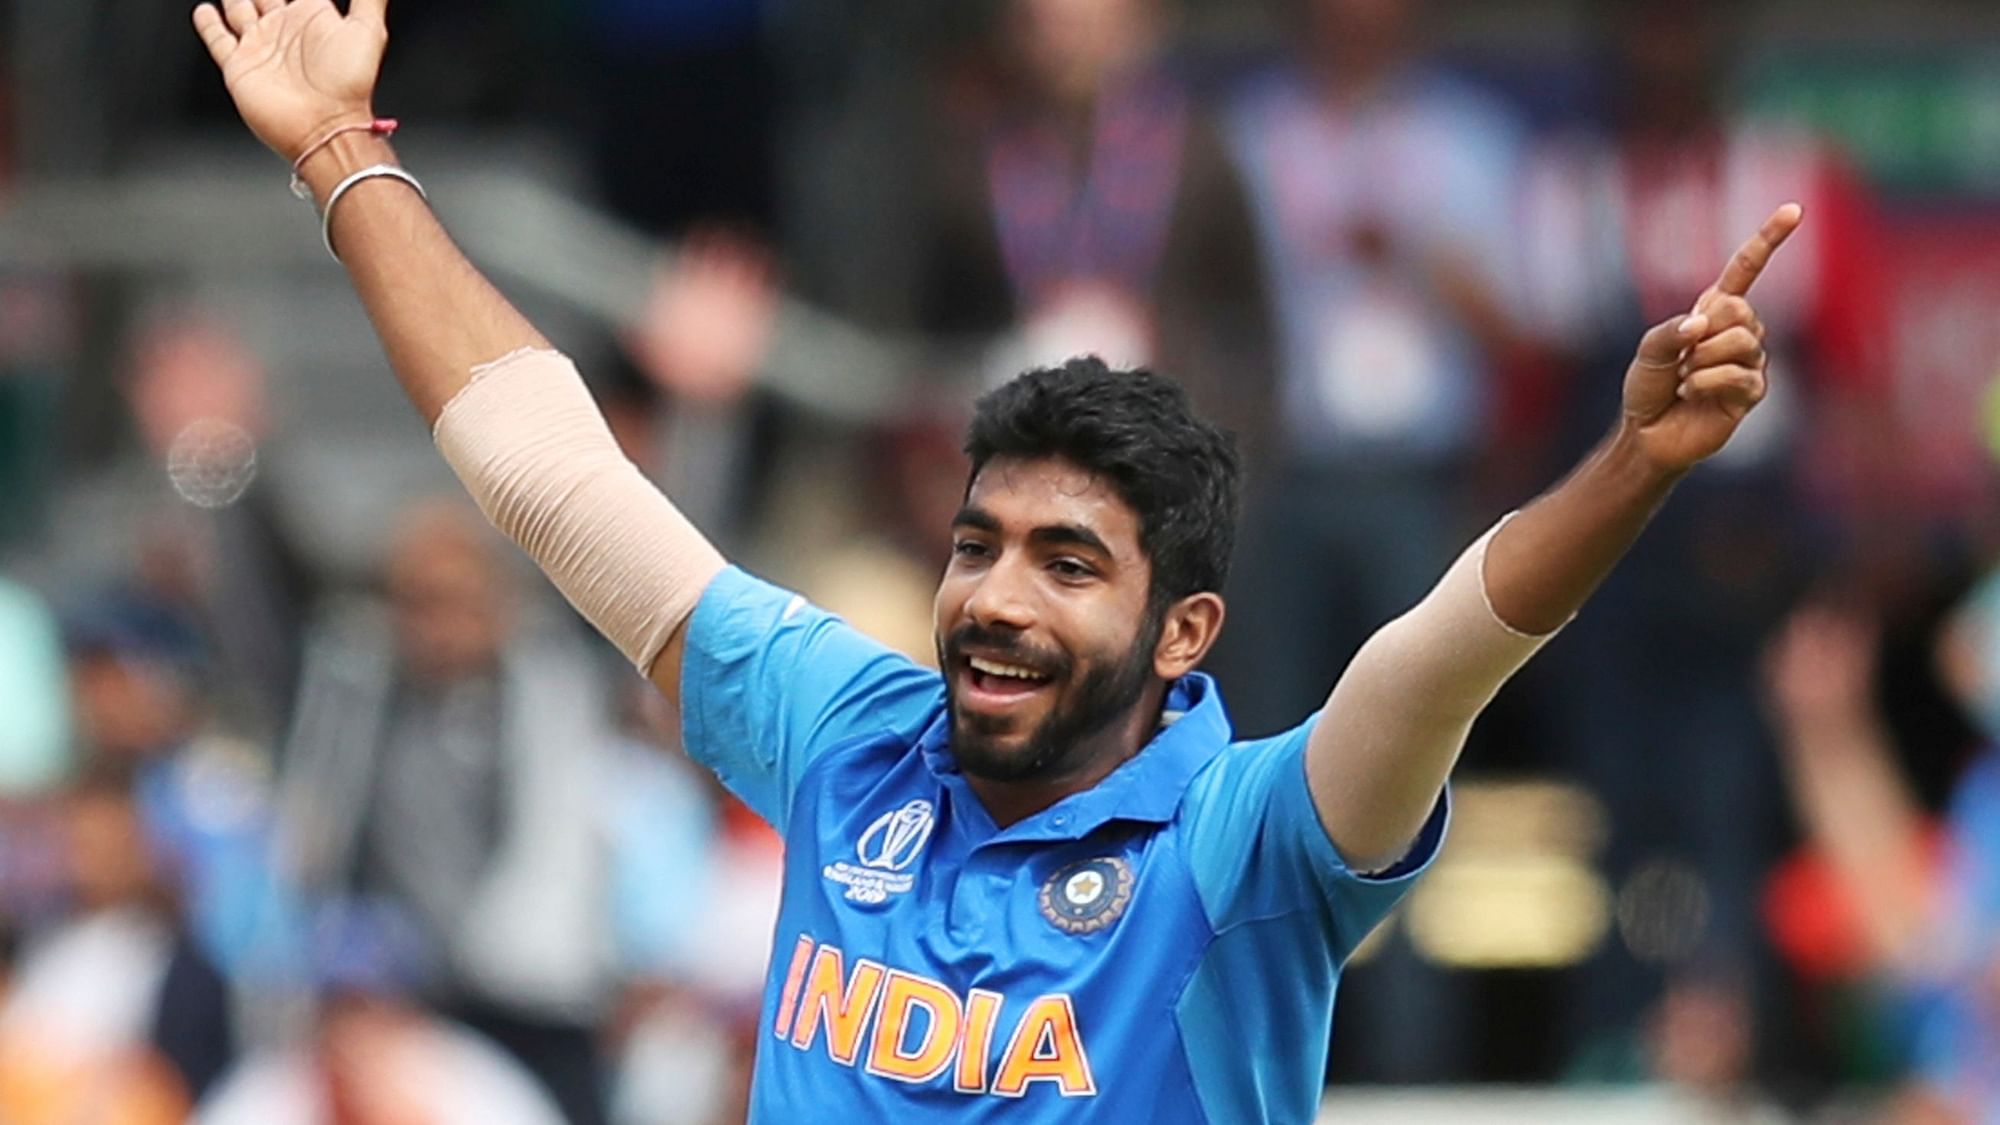 Jasprit Bumrah picked up his 100th ODI wicket during the match against Sri Lanka.